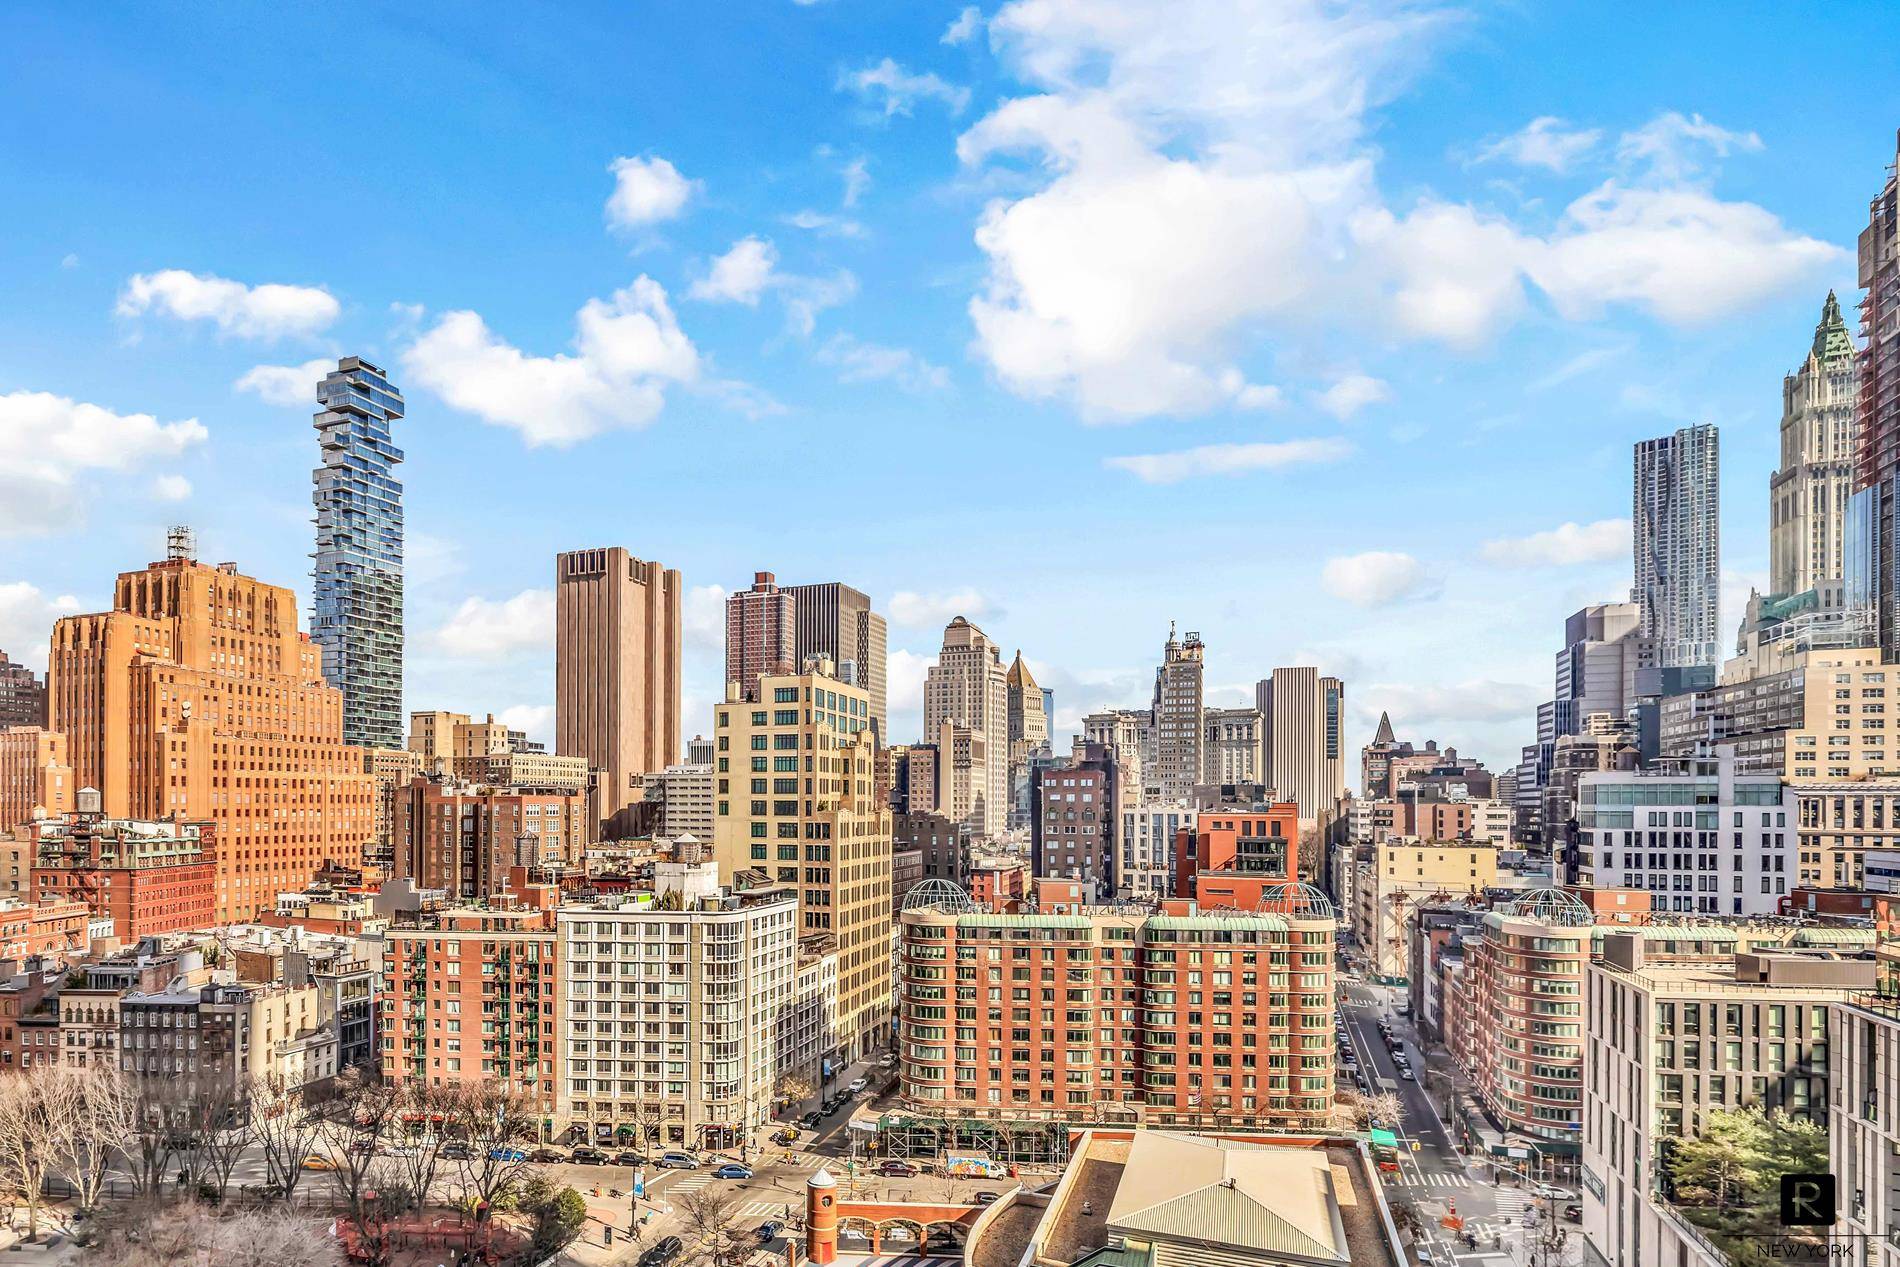 Lease out Amazing city views from this corner two bedroom, two and a half bath home in prime Tribeca.